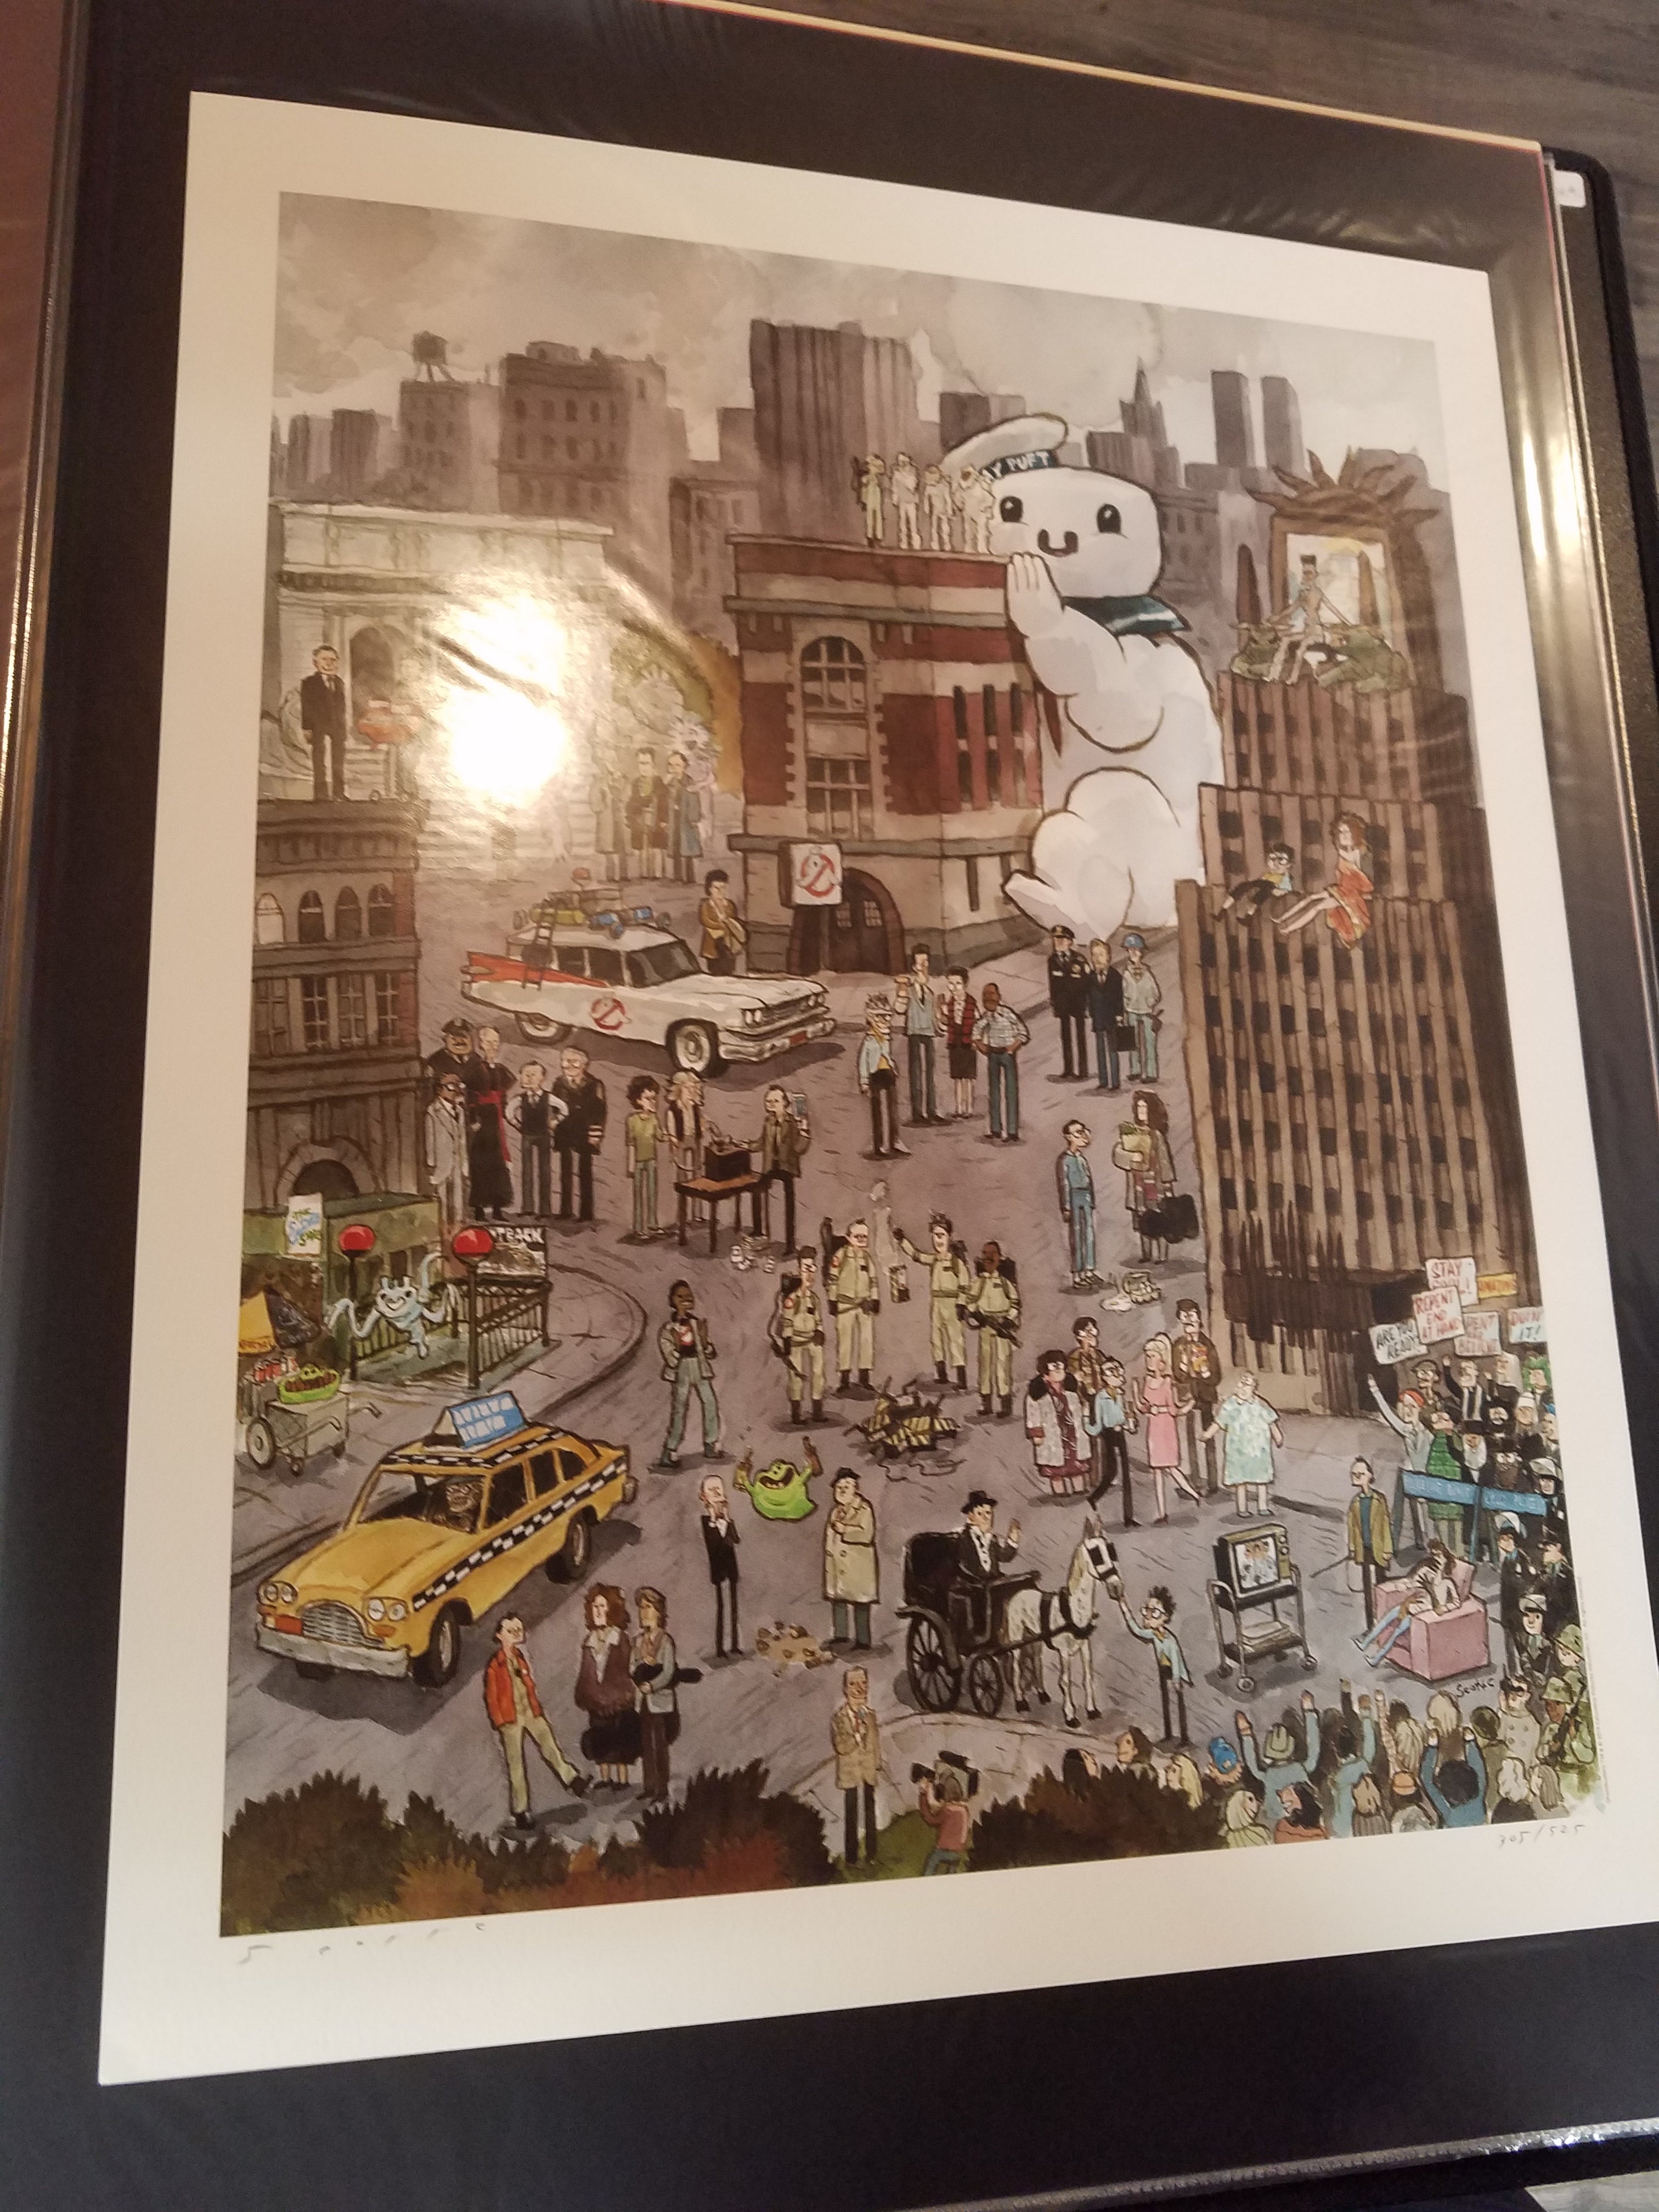 Title:  "Ghostbusterland"  Artist:  Scott Campbell  Edition:  xx/525  Type:  Screen print  Size:  16" x 20"  Notes:  Released in 2015.  Signed and numbered by the artist  Stored flat in very good condition.  Check out our other listings for more hard-to-find and out-of-print posters.